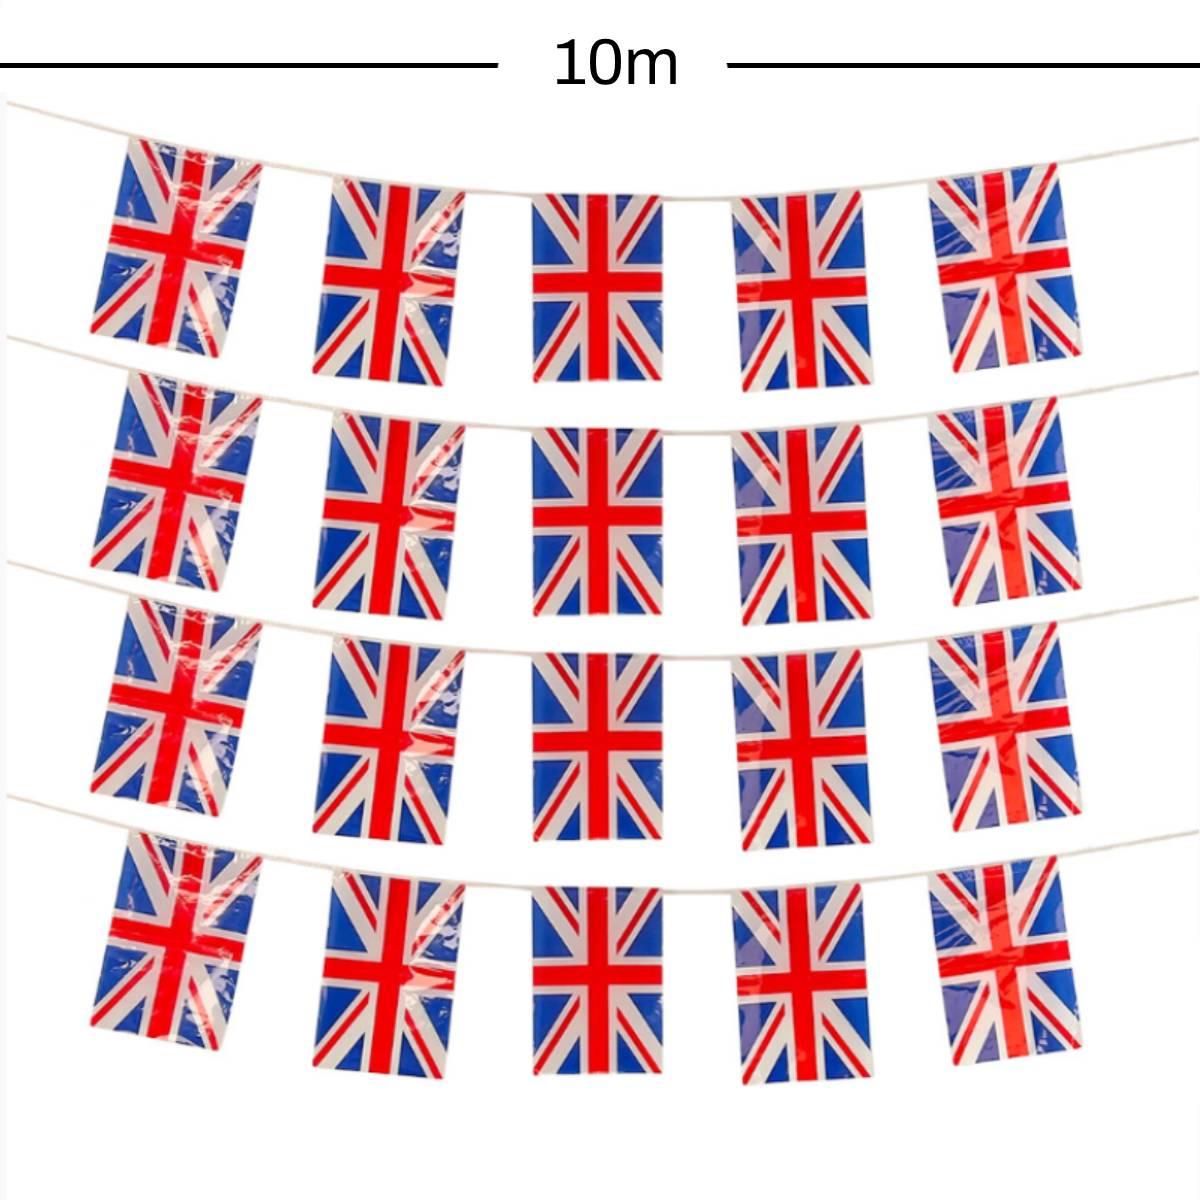 Great Britain Union Jack Flag 10m Bunting with 20 large flags by Wicked AC-9438 available here at Karnival Costumes online party shop